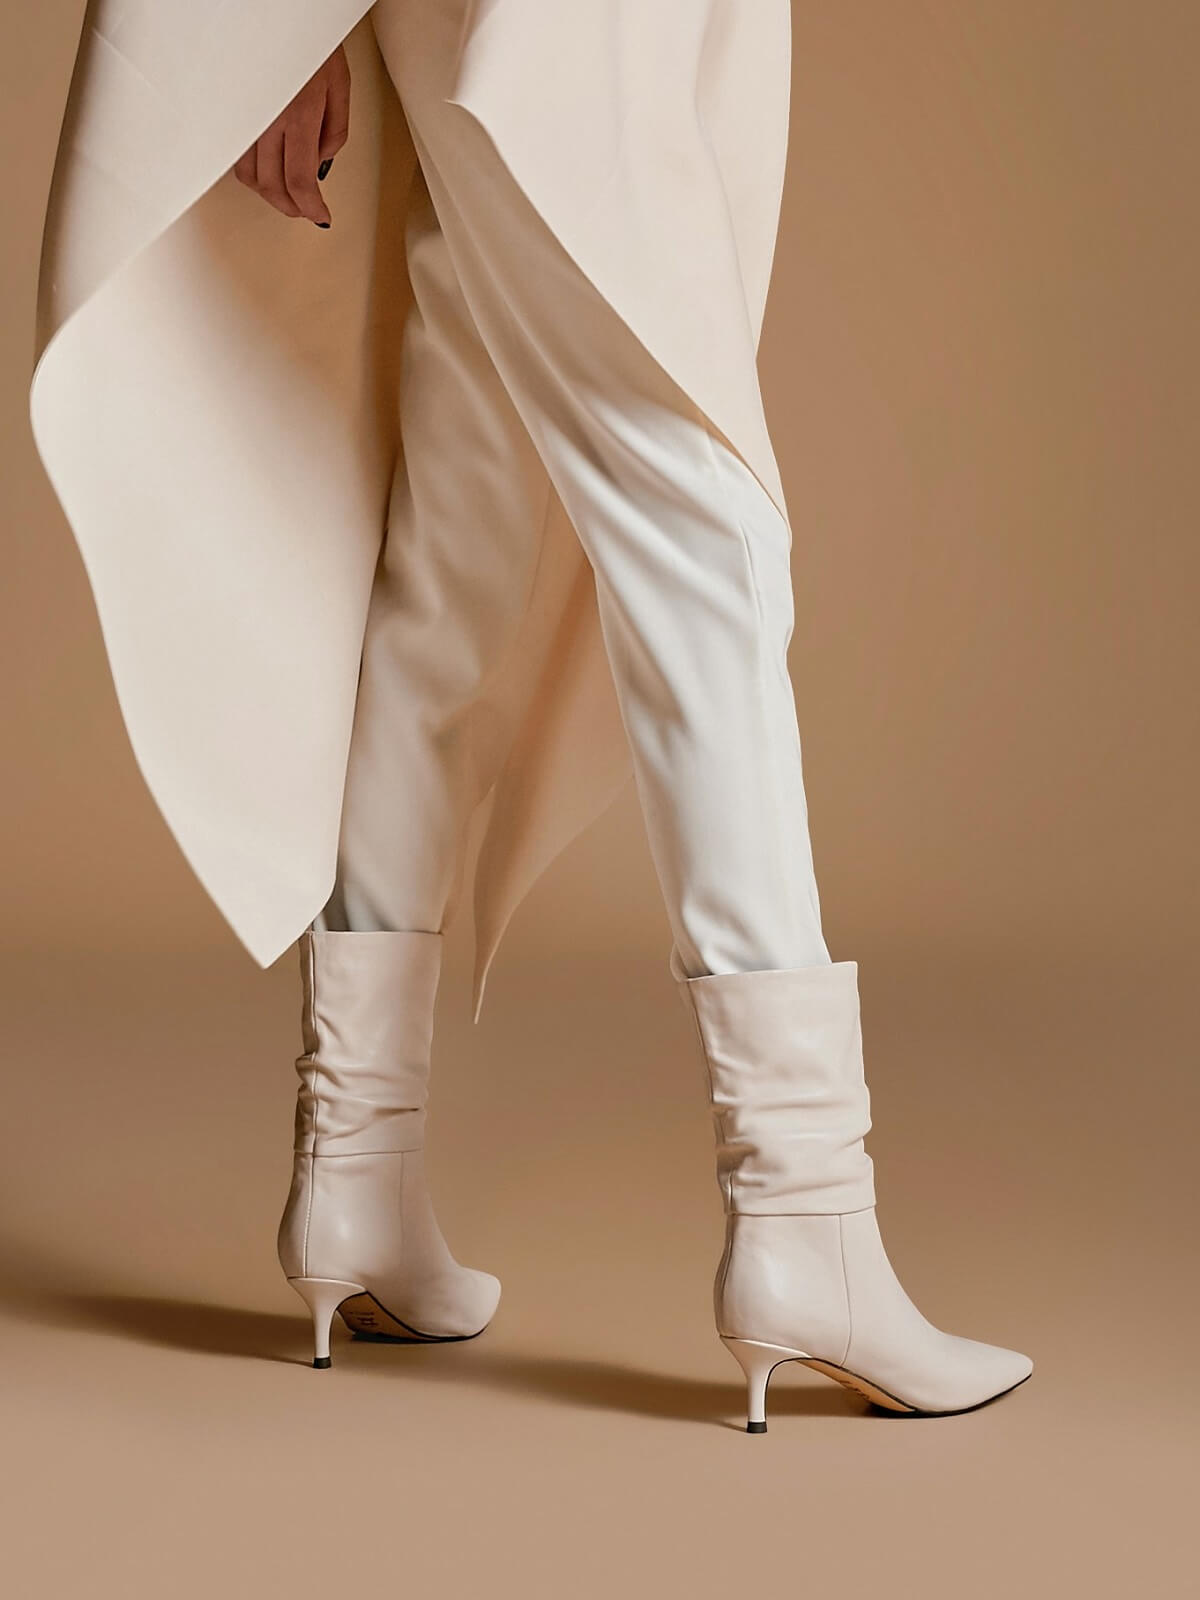 ROLISA-Milo-Slouchy-Ruched-Leather-Kitten-Heels-Mid-Calf-Boots-White-Model-4